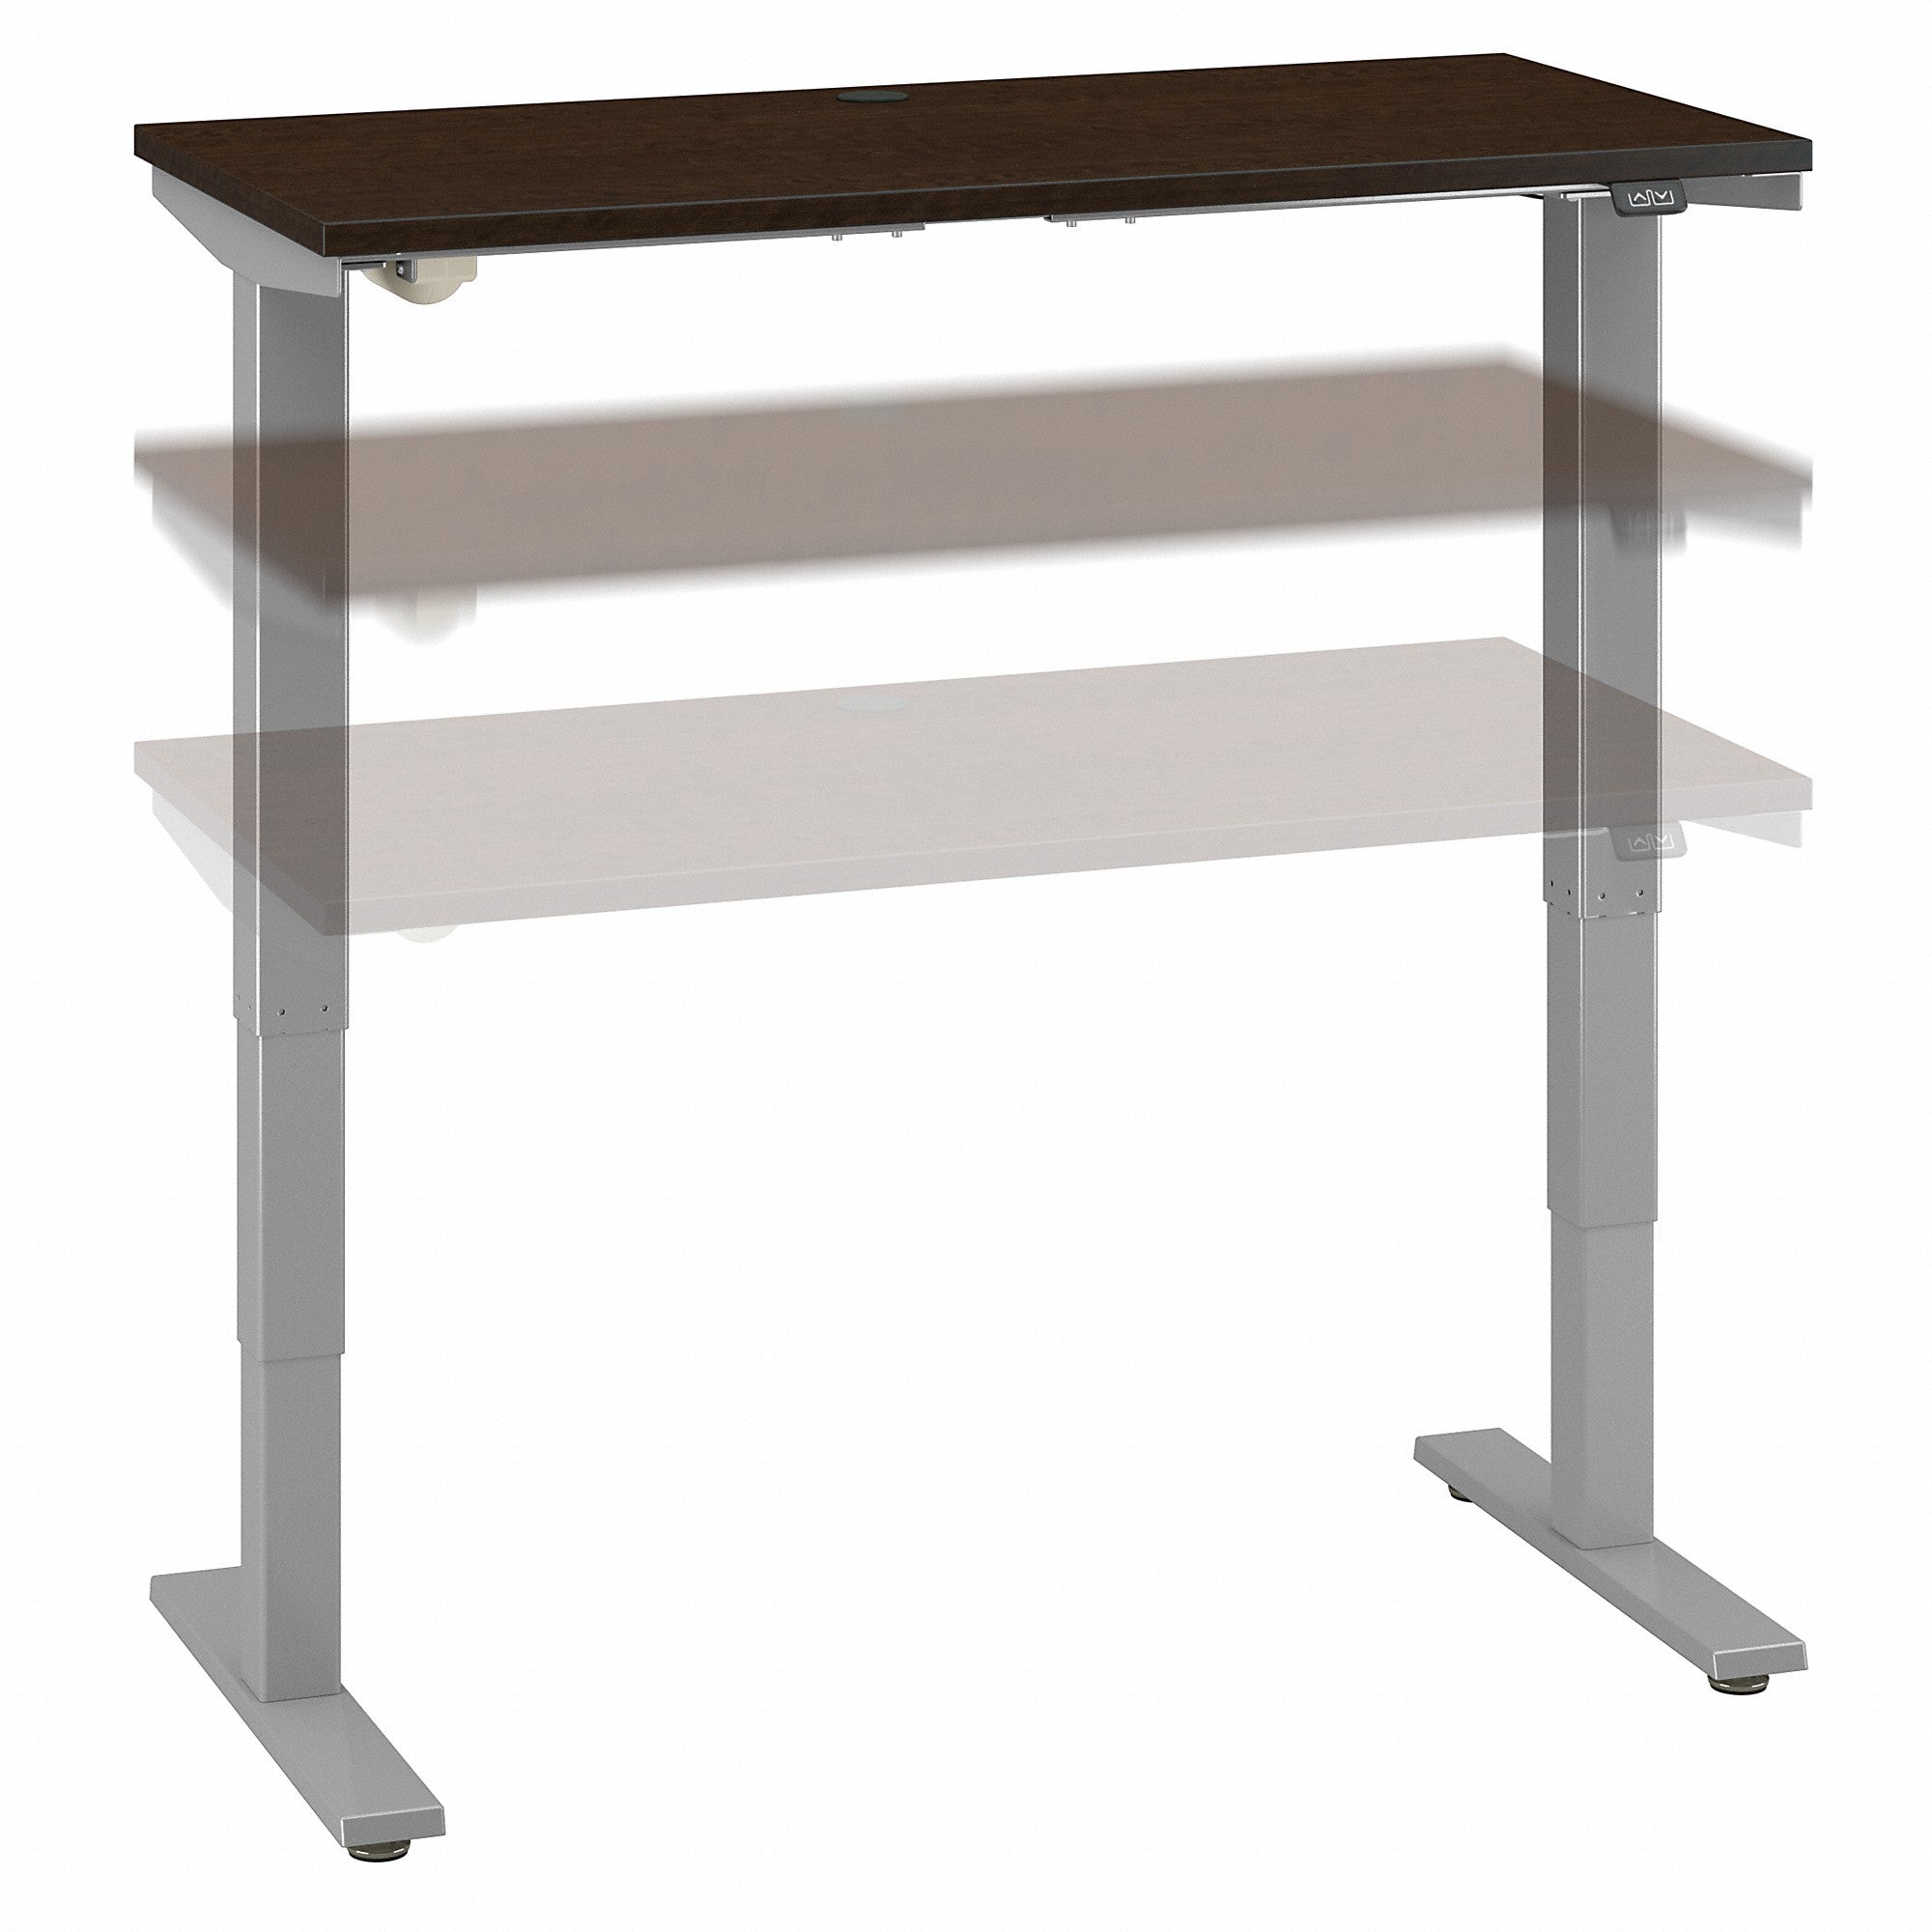 Move 40 Series by Bush Business Furniture 48W x 24D Electric Height Adjustable Standing Desk | Mocha Cherry/Cool Gray Metallic